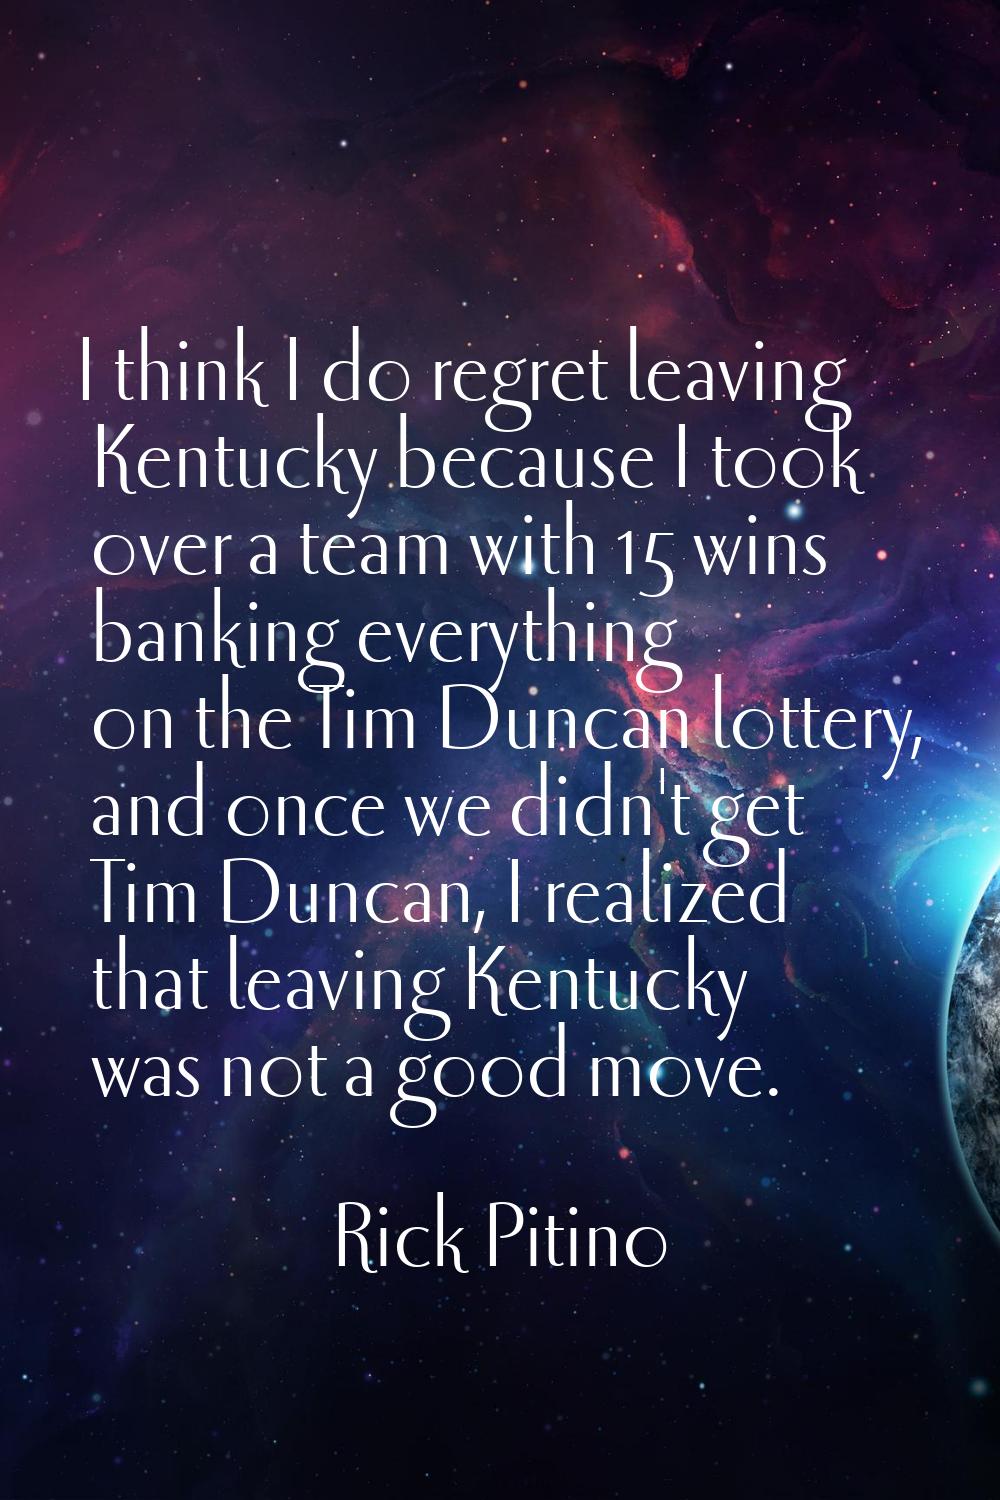 I think I do regret leaving Kentucky because I took over a team with 15 wins banking everything on 